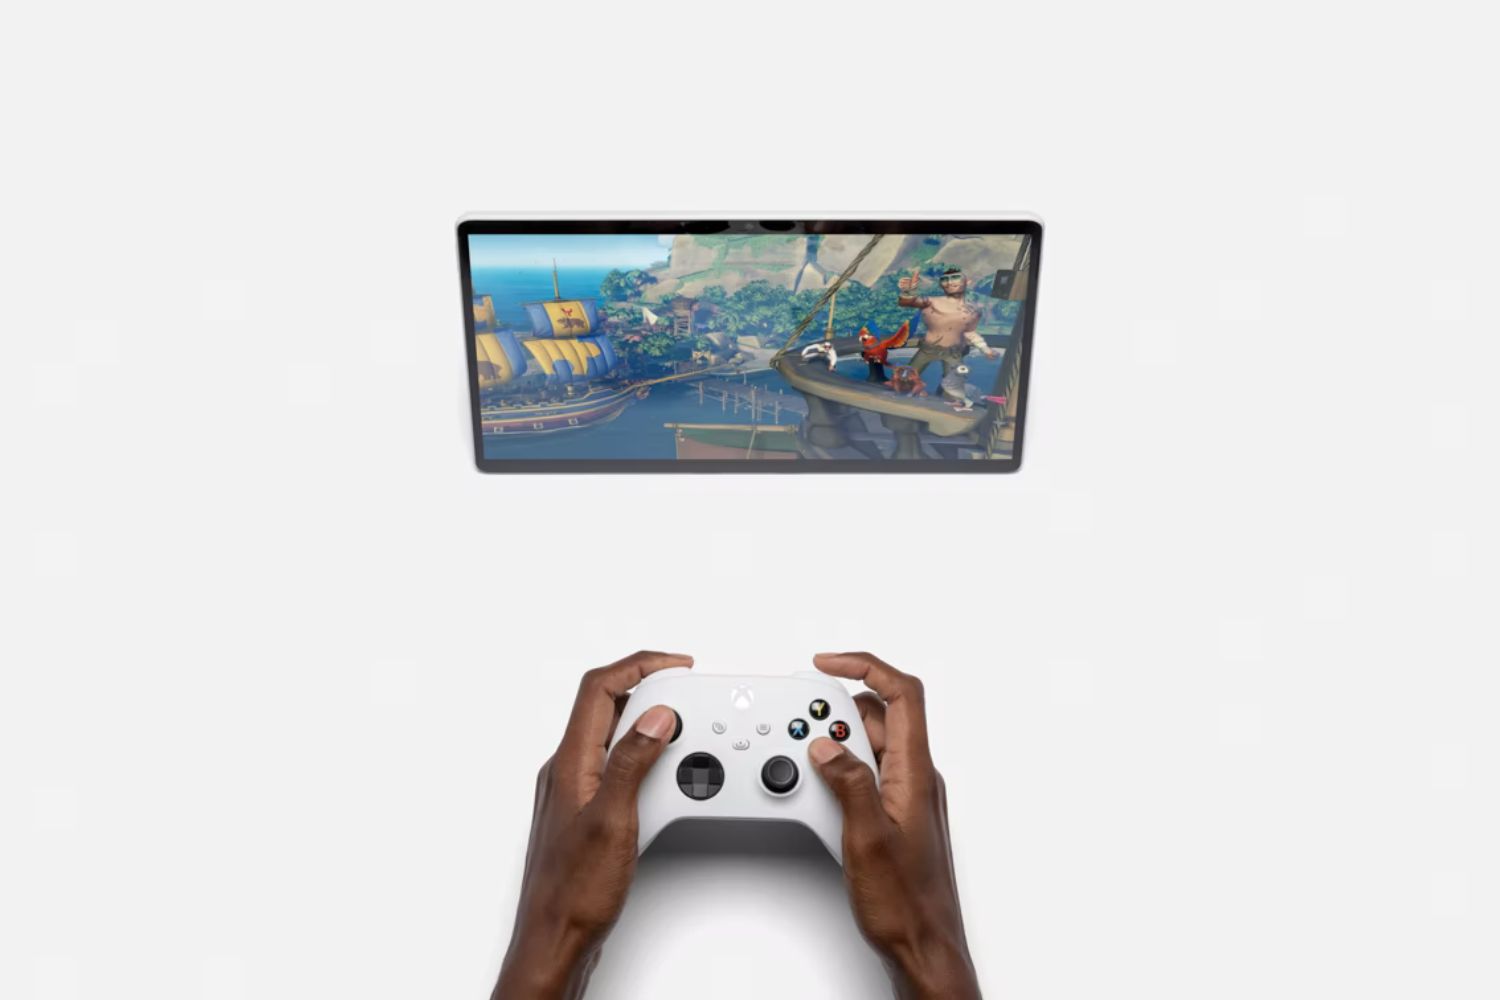 How To Connect Your Xbox Controller To Your Tablet